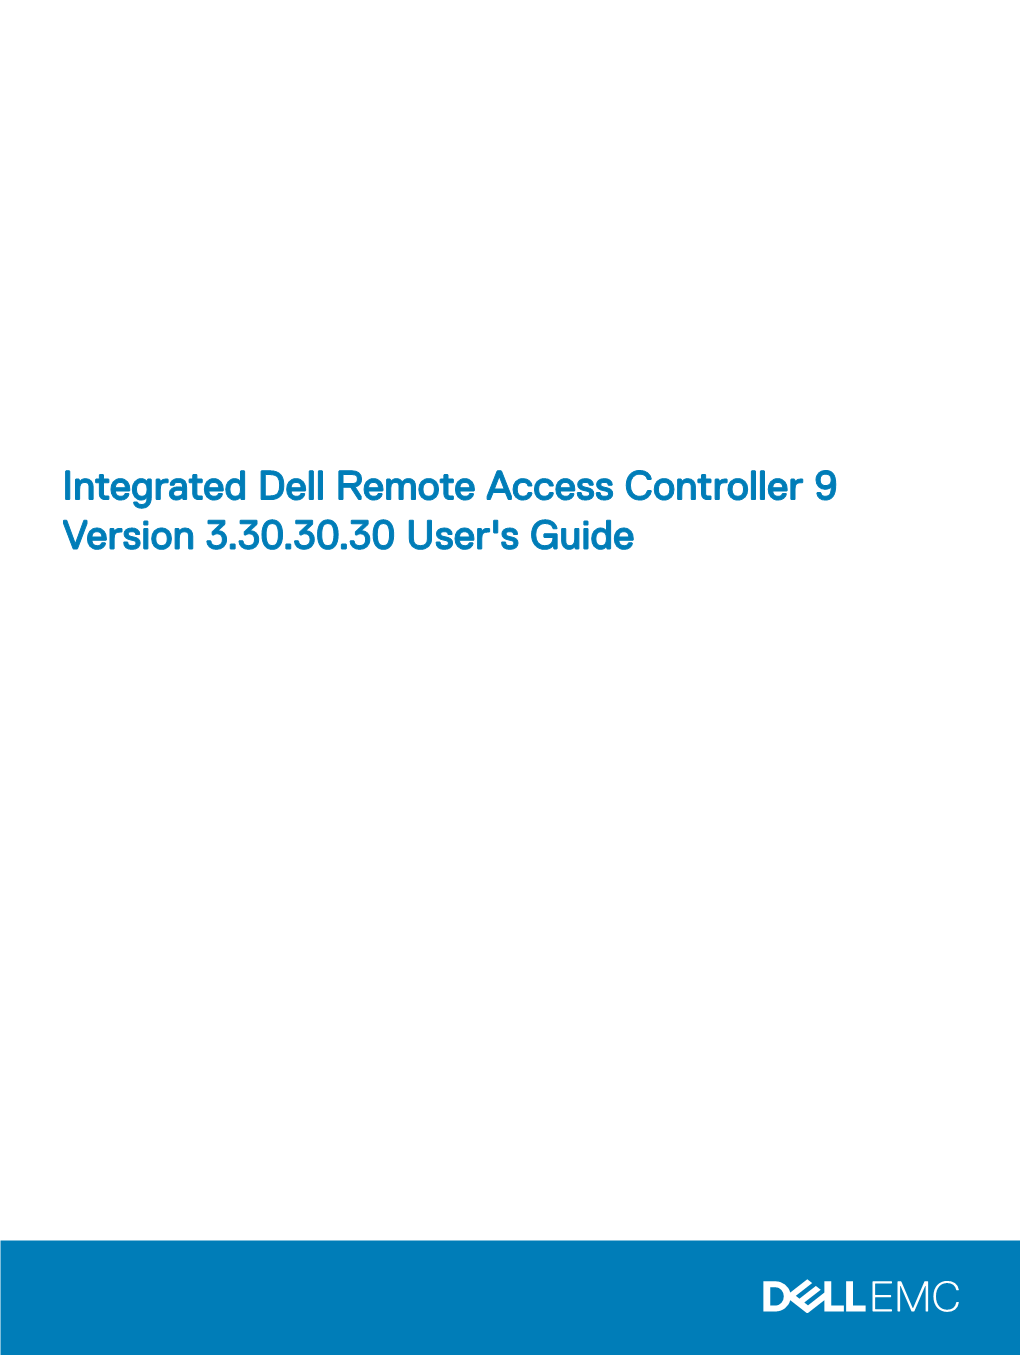 Integrated Dell Remote Access Controller 9 Version 3.30.30.30 User's Guide Notes, Cautions, and Warnings